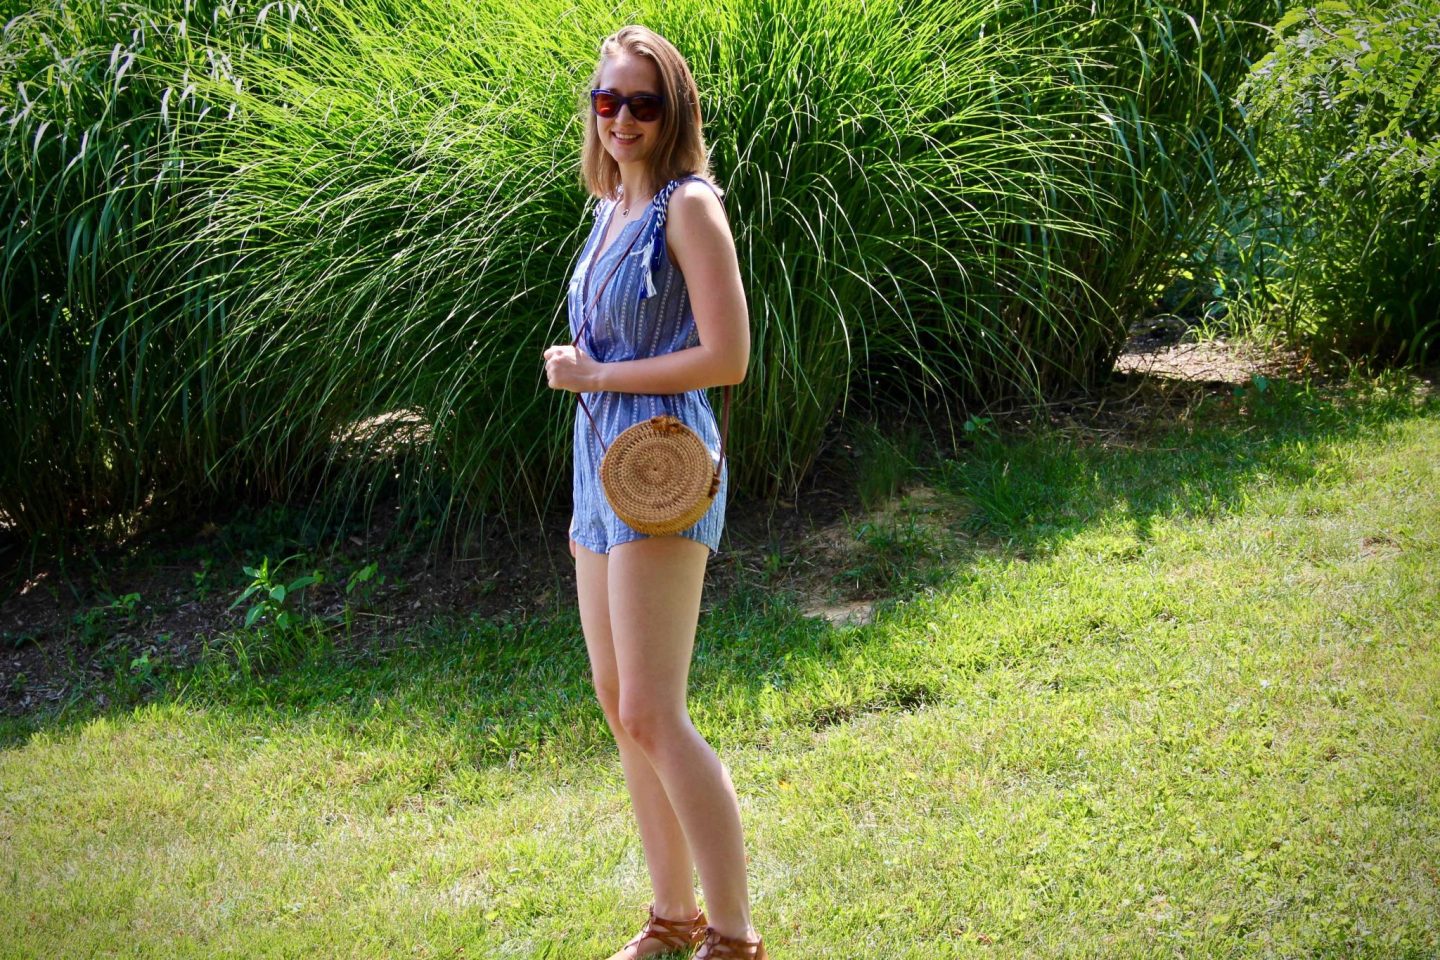 Circle Straw Purse ... How to Style a Preppy Romper ... The Spectacular Adventurer